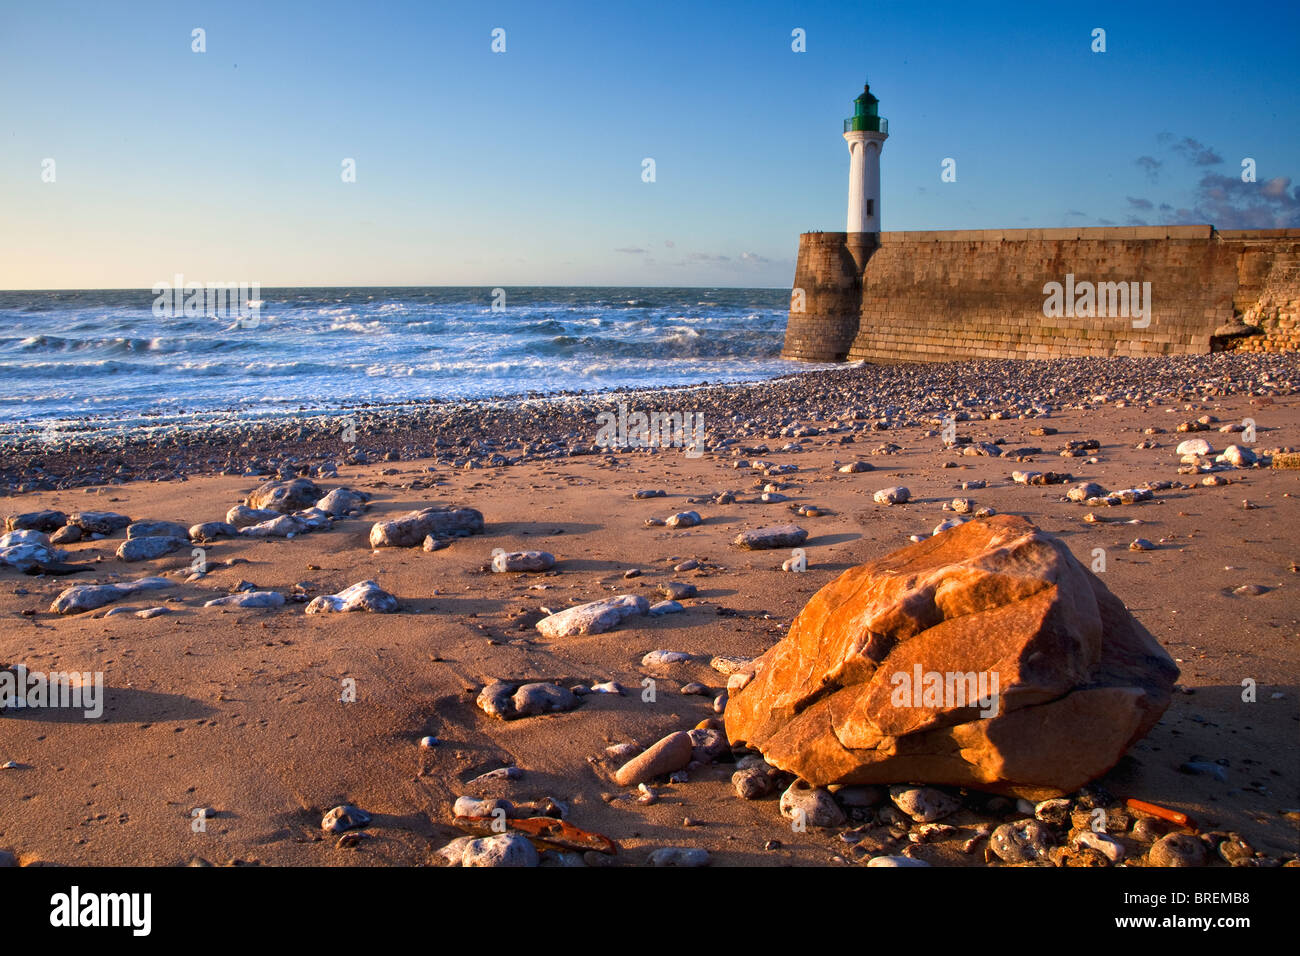 Lighthouse and beach at Saint-Valery-en-Caux, Upper Normandy, France Stock Photo